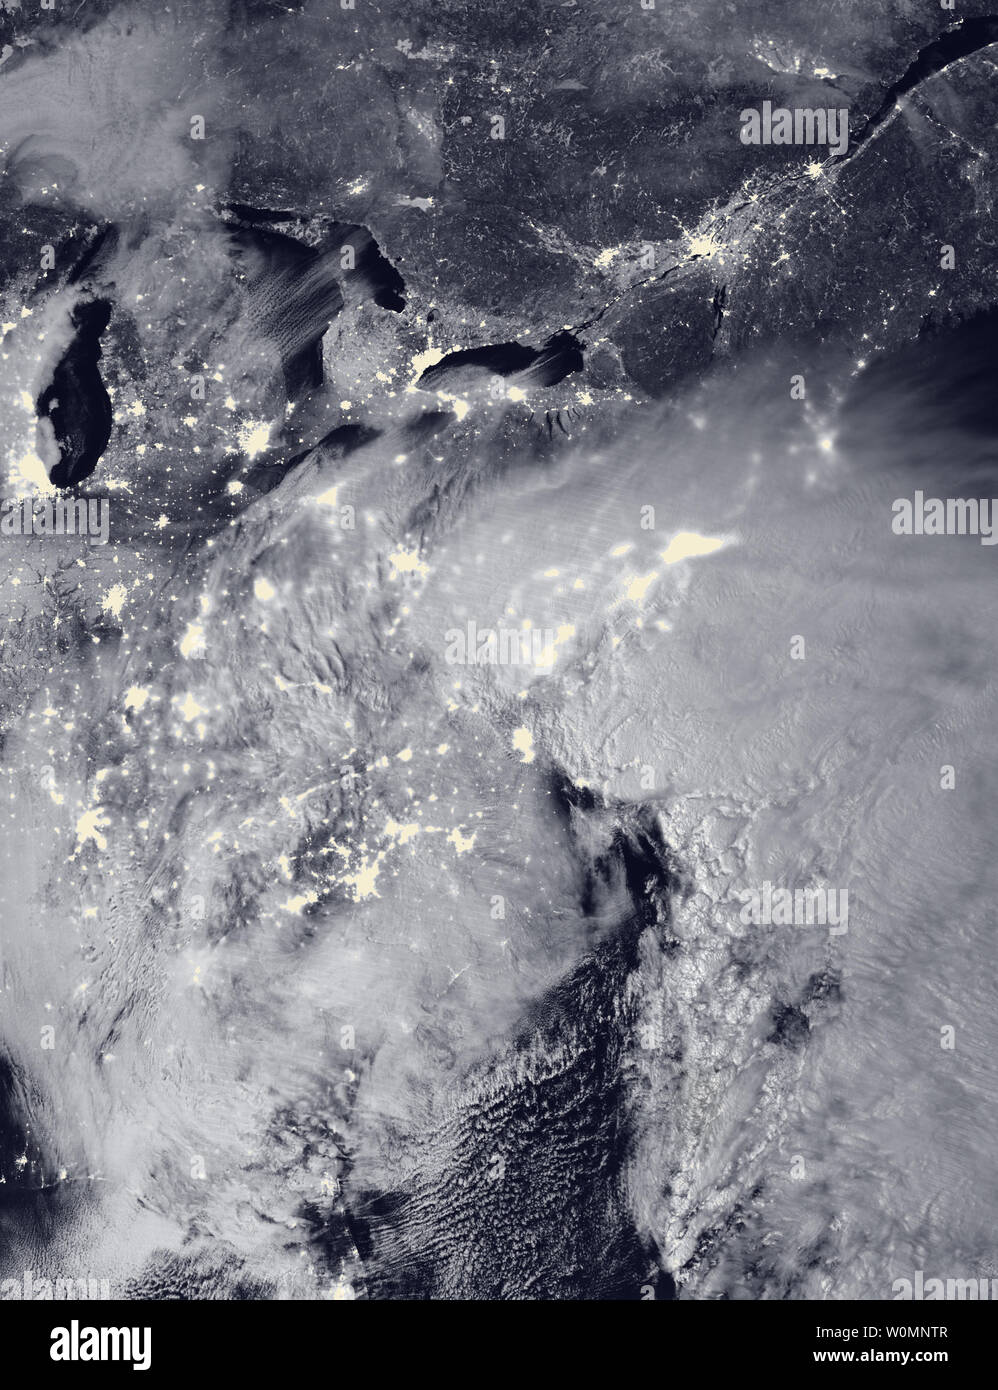 NASA and NOAA satellites are tracking the large winter storm that is expected to bring heavy snowfall to the U.S. mid-Atlantic region on January 22 and 23. NASA-NOAA's Suomi NPP satellite snapped this image of the approaching blizzard around 2:15 a.m. EST on January 23, 2016 using the Visible Infrared Imaging Radiometer Suite (VIIRS) instrument's Day-Night band. In the image, the clouds are lit from above by the nearly full Moon and from below by the lights of the heavily populated East Coast. The city lights are blurred in places by cloud cover. UPI Stock Photo